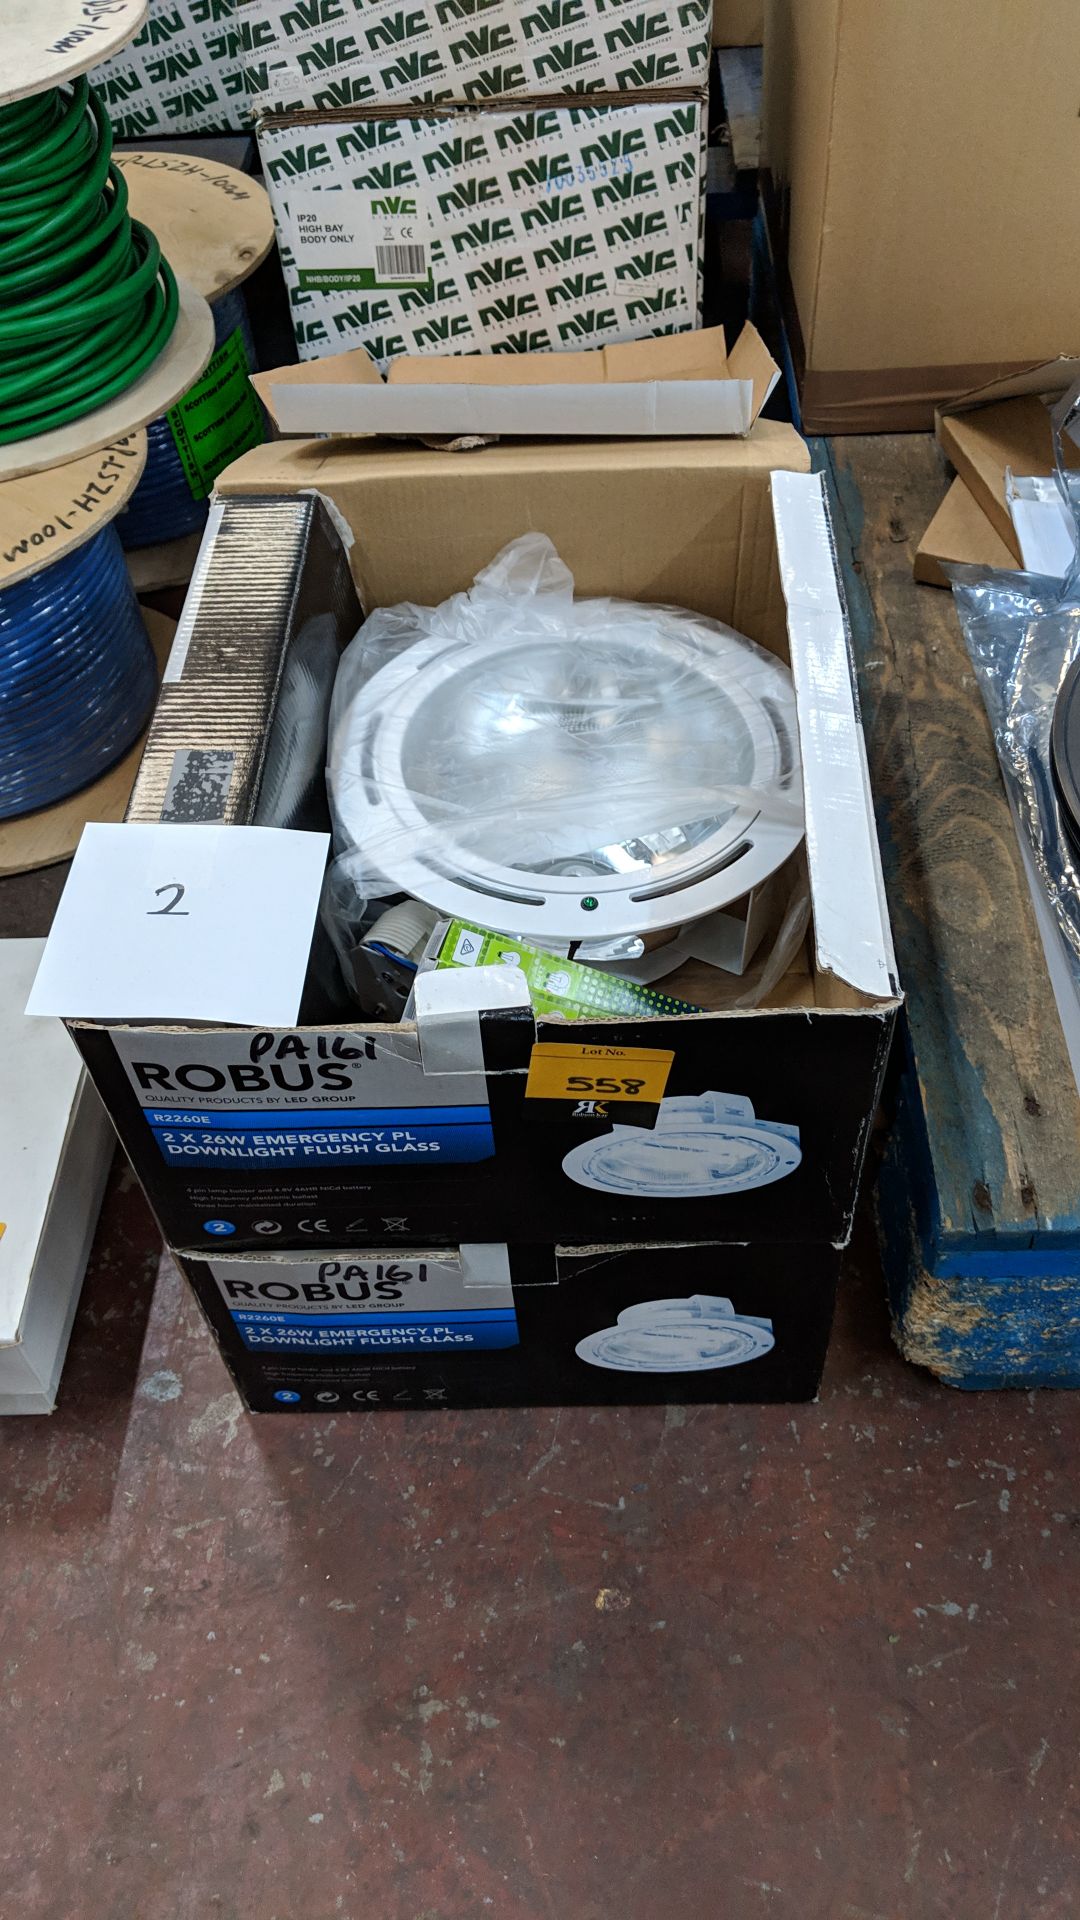 2 off Robus 2 x 26W emergency PL round downlight units with flush glass This lot is one of a